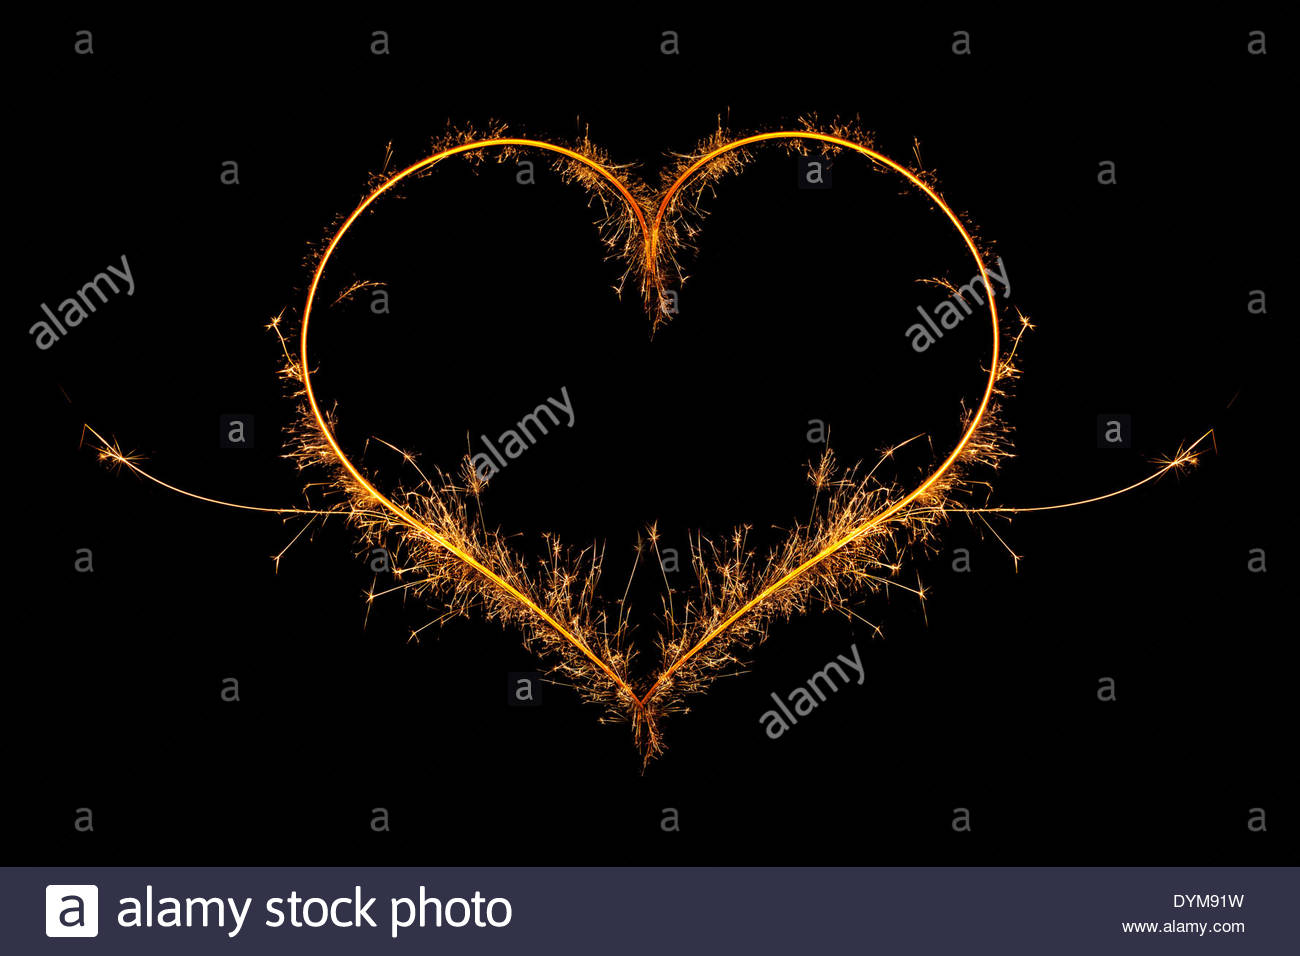 Sparkling Heart Made Of Fireworks On Black Background Fire Love